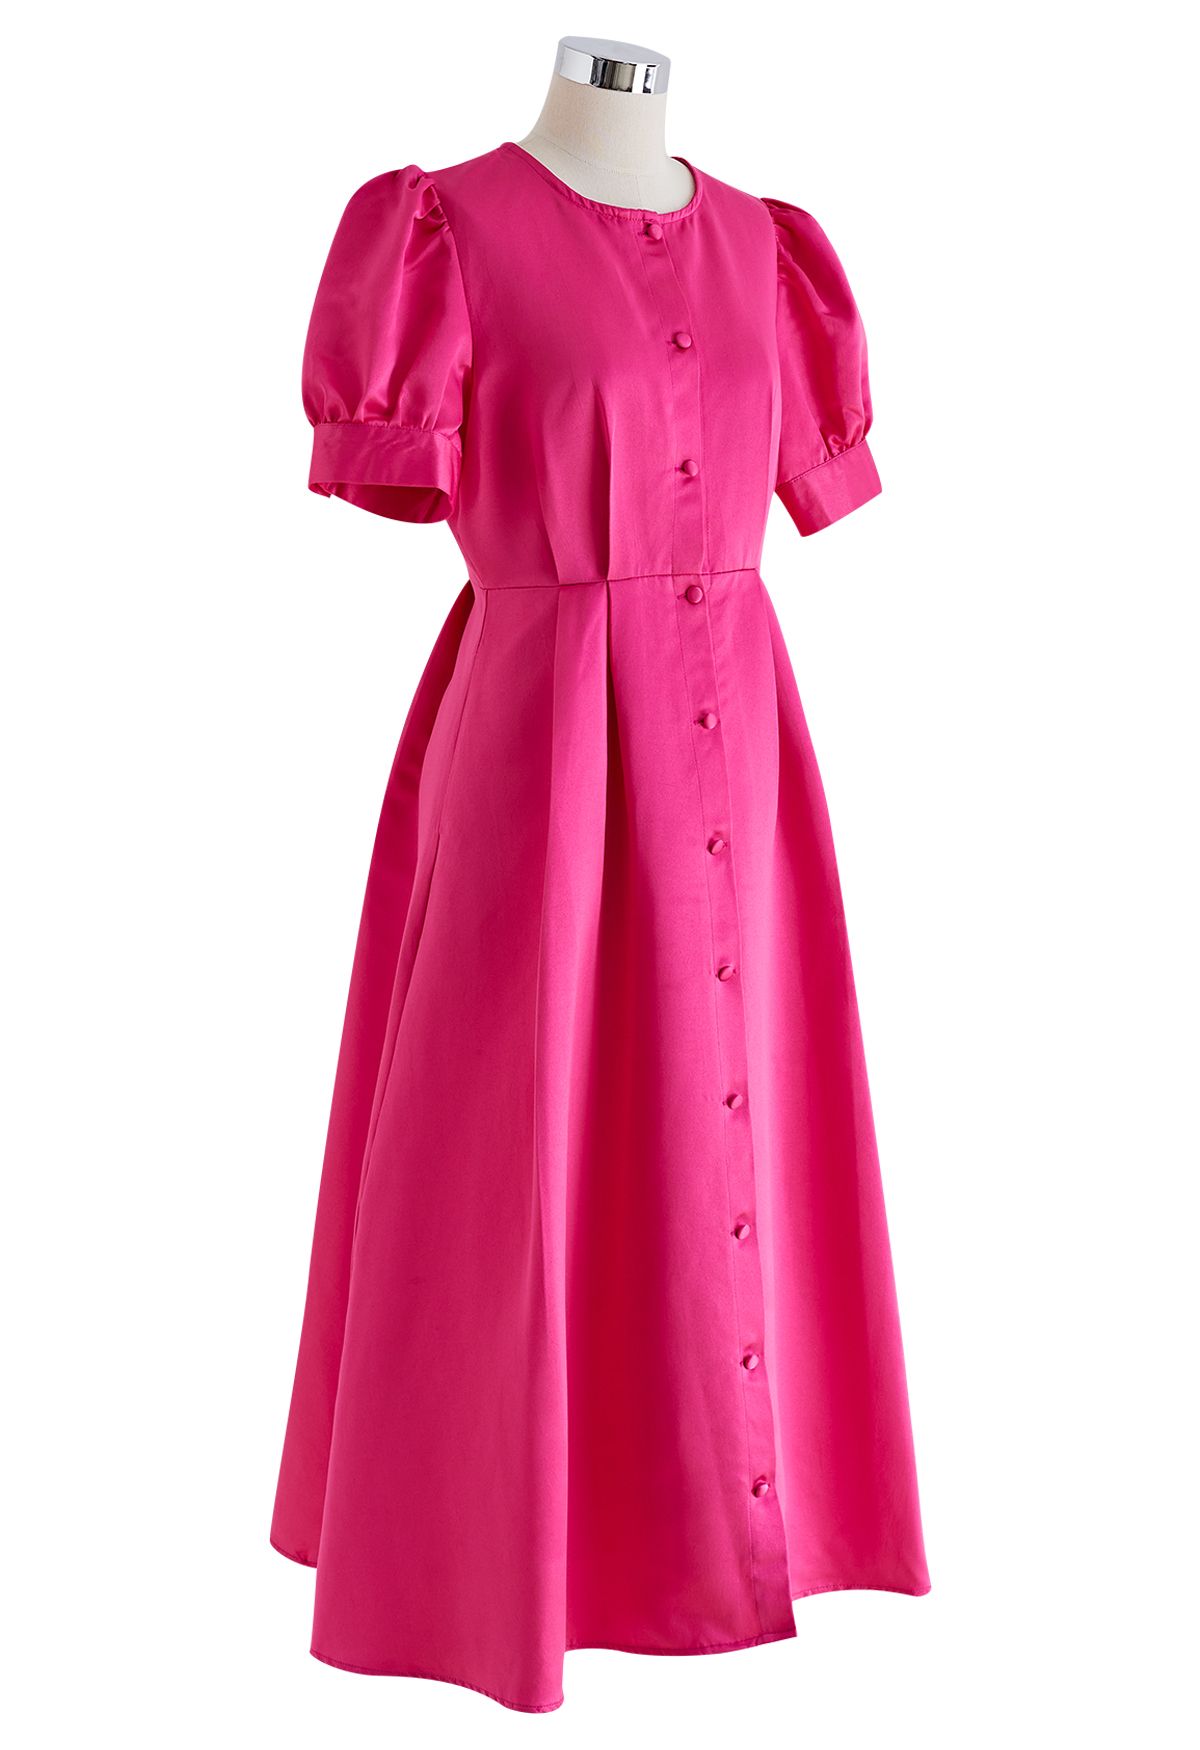 Glossy Satin Button Down Midi Dress in Hot Pink